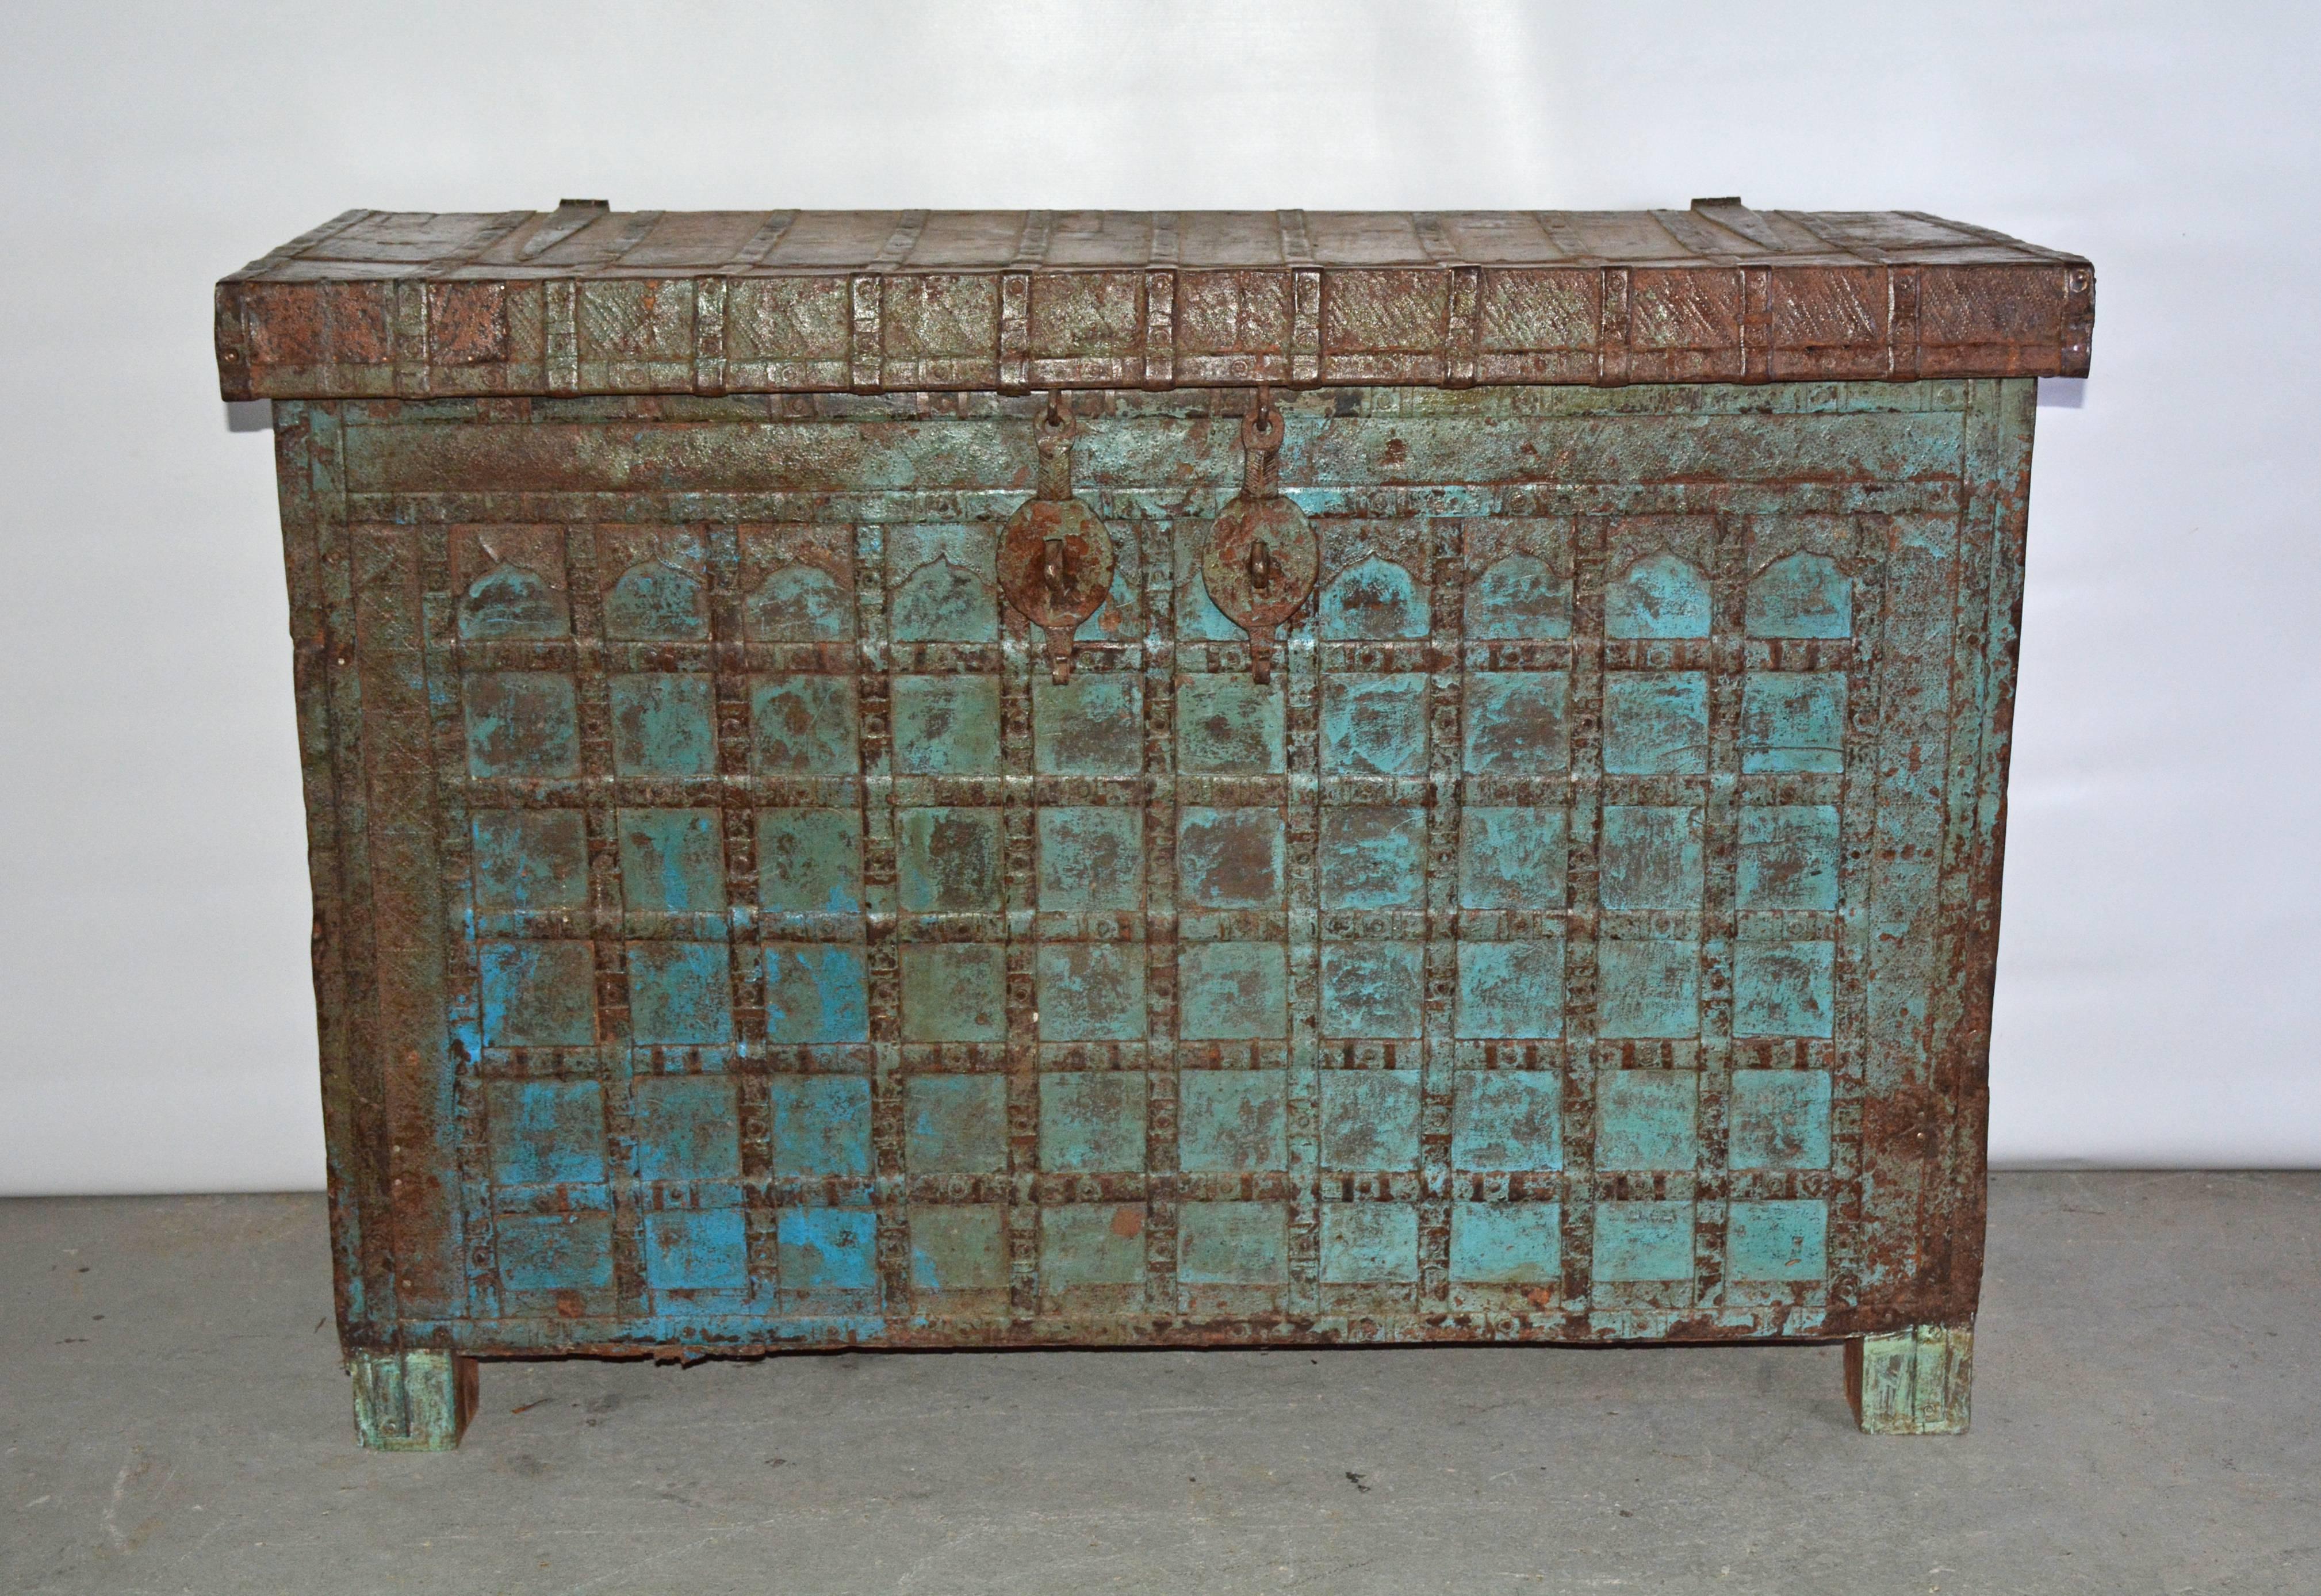 Great statement piece, this tall antique Indian chest or console table is painted blue and has crisscrossed iron strapping secured to wood. Embossed iron panels frame the top and front. Wood legs. Pairs of iron hinges, latches, side handles and a